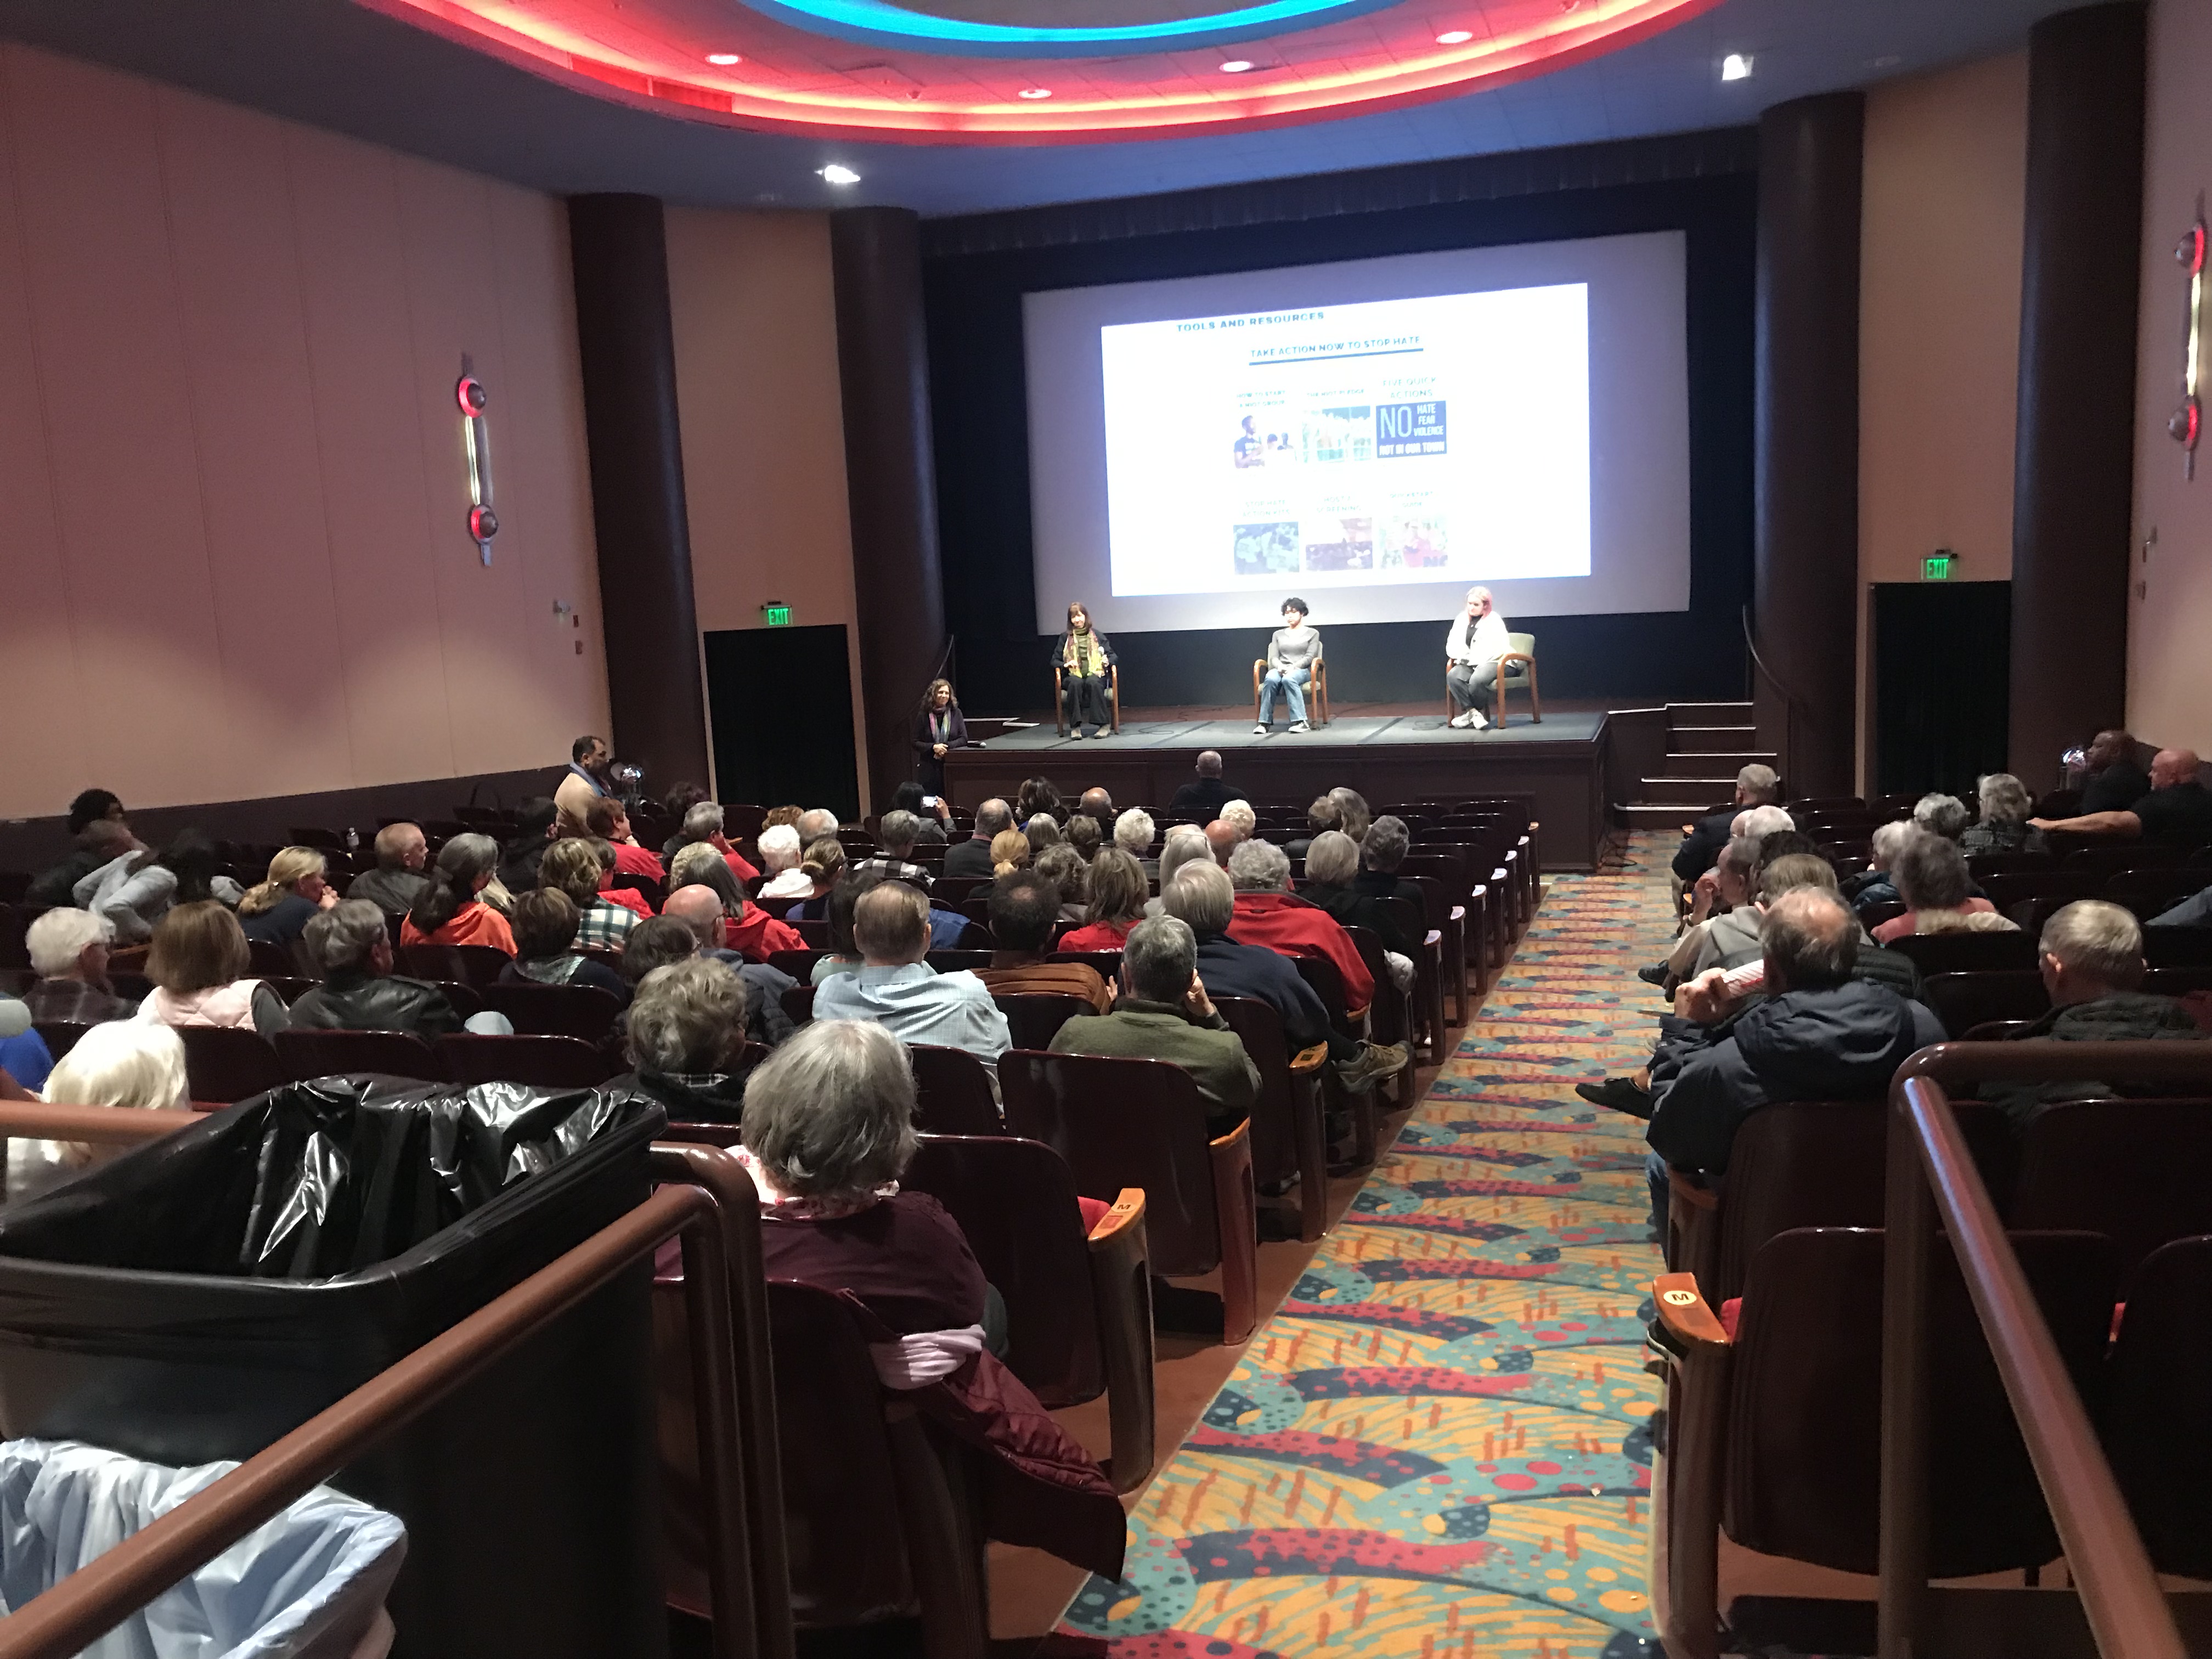 Panel discussion after the 'Repairing the World' screening in Bloomington-Normal, IL in April 2023.